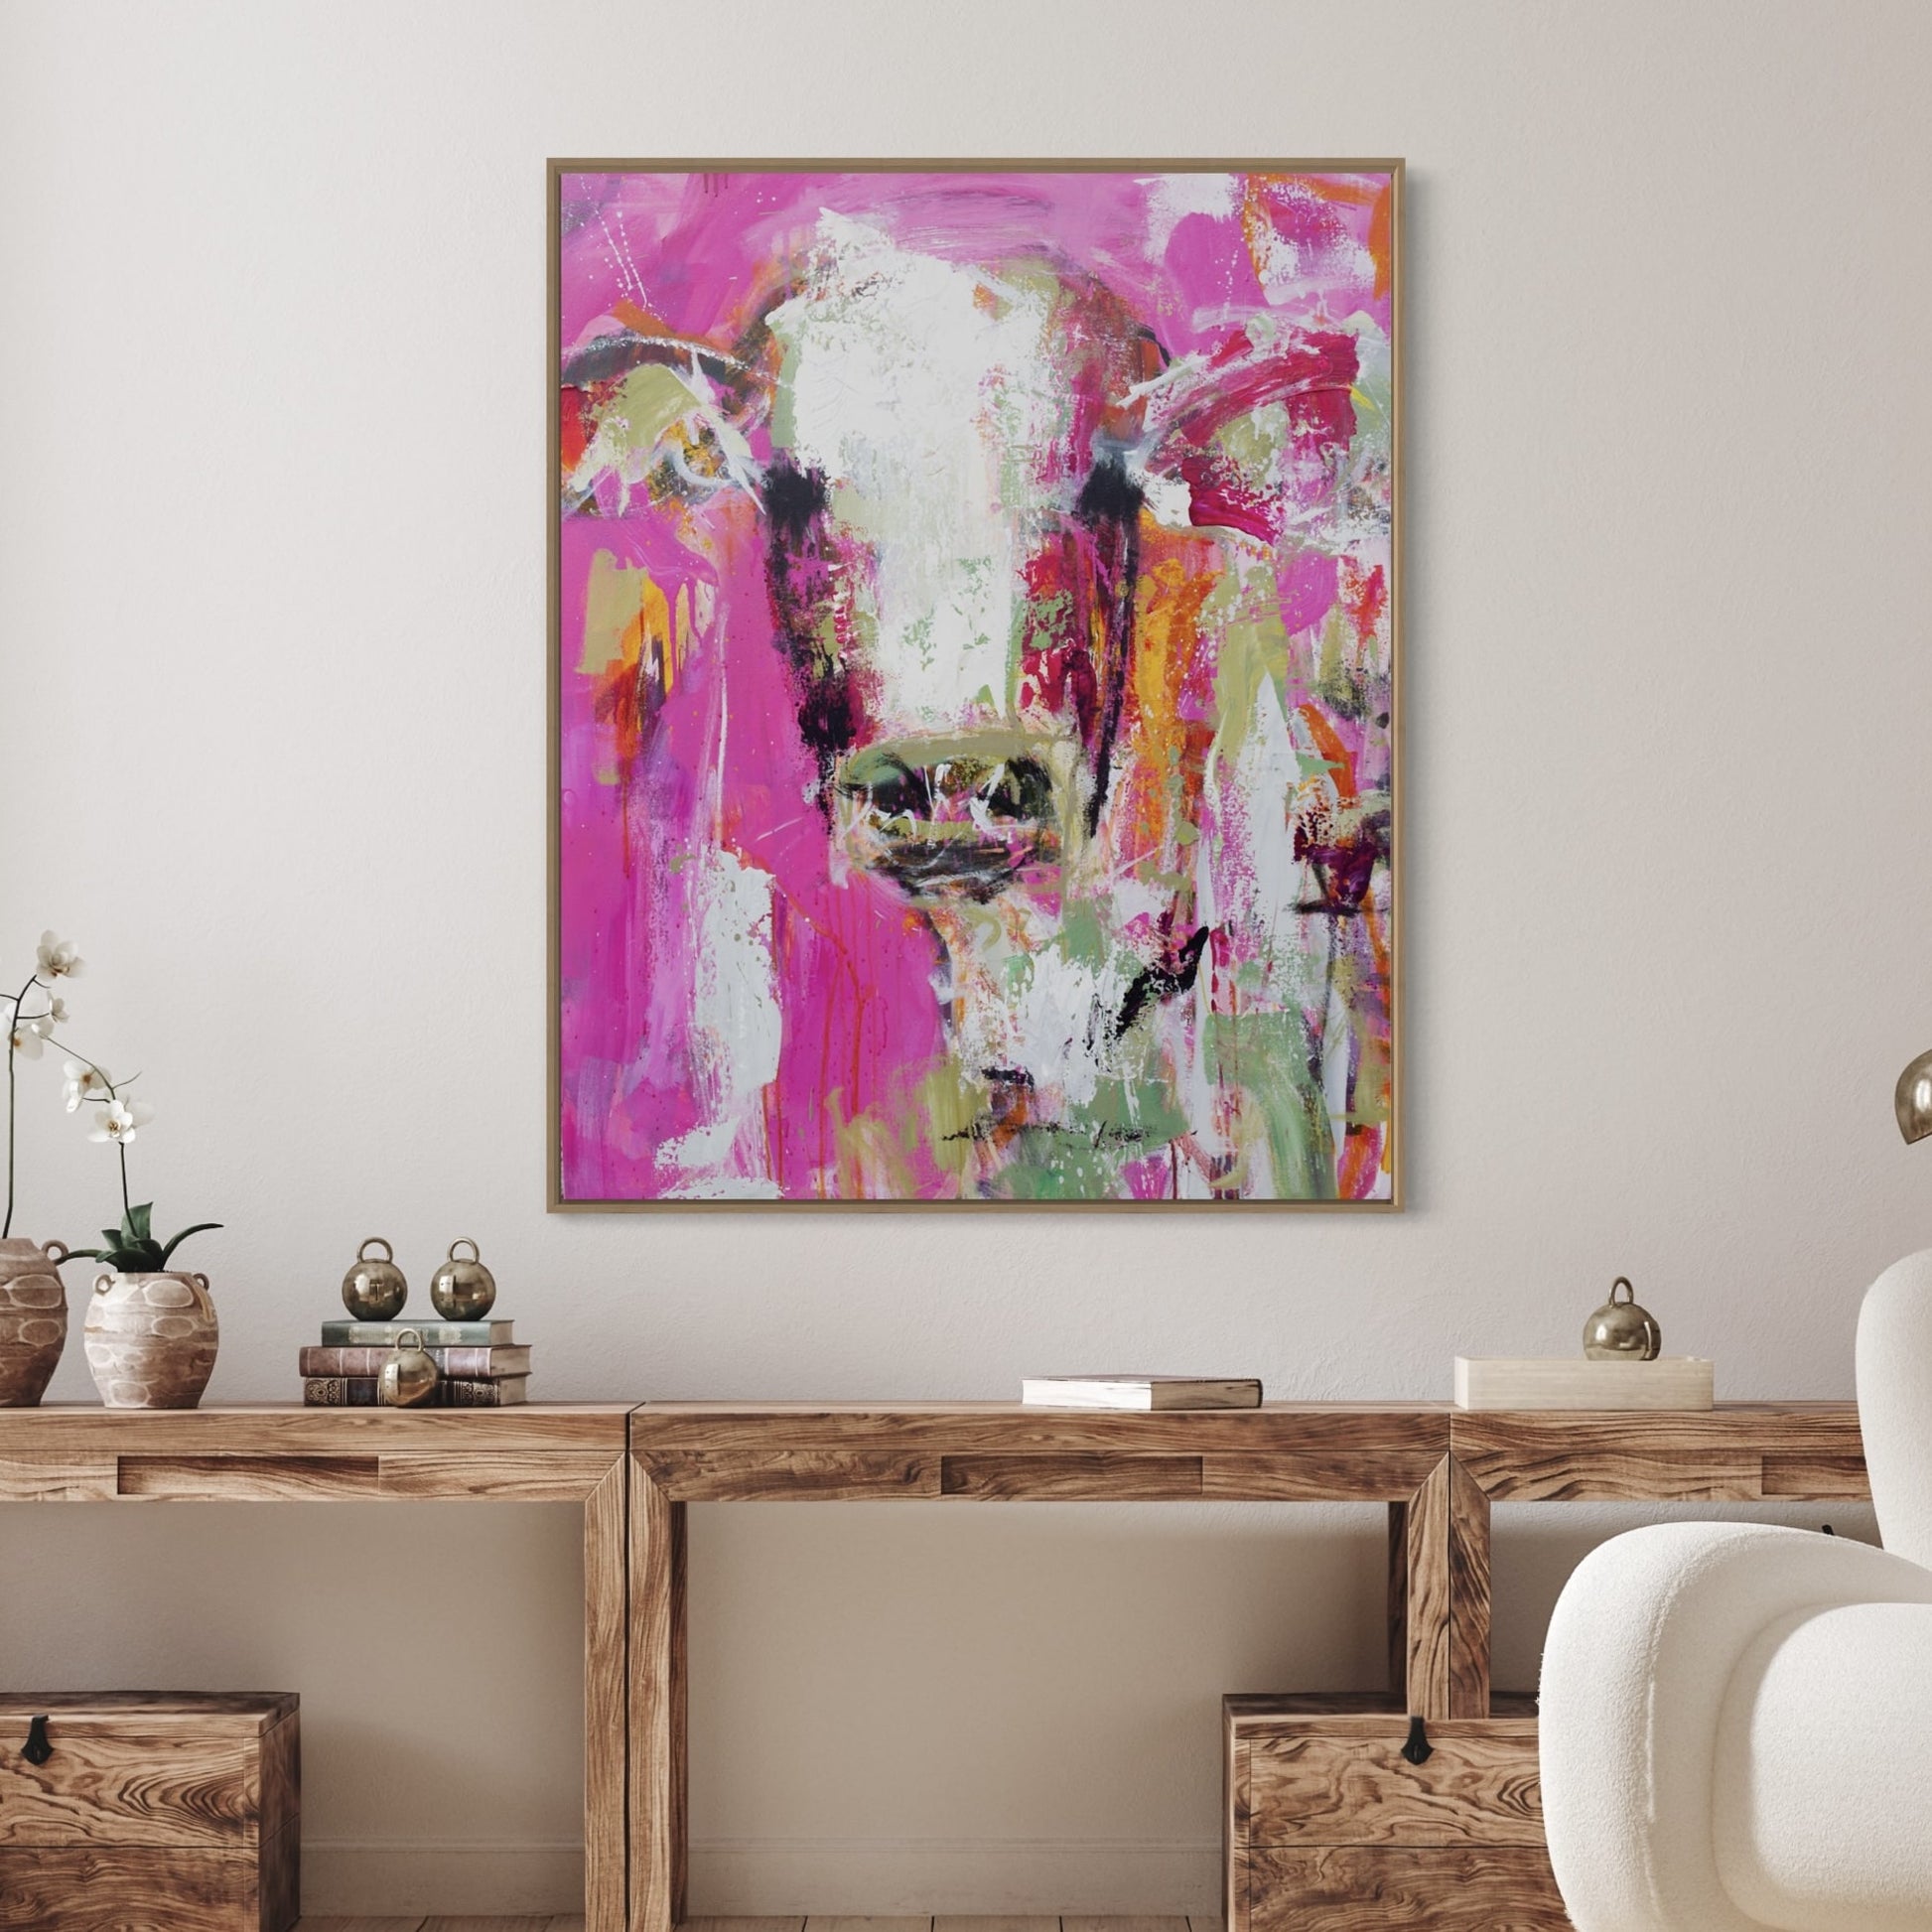 Ruby - Abstract Cow by Australian Artist Rose Hewartson Original Abstract Painting on Canvas Framed 96x123 cm Statement Piece